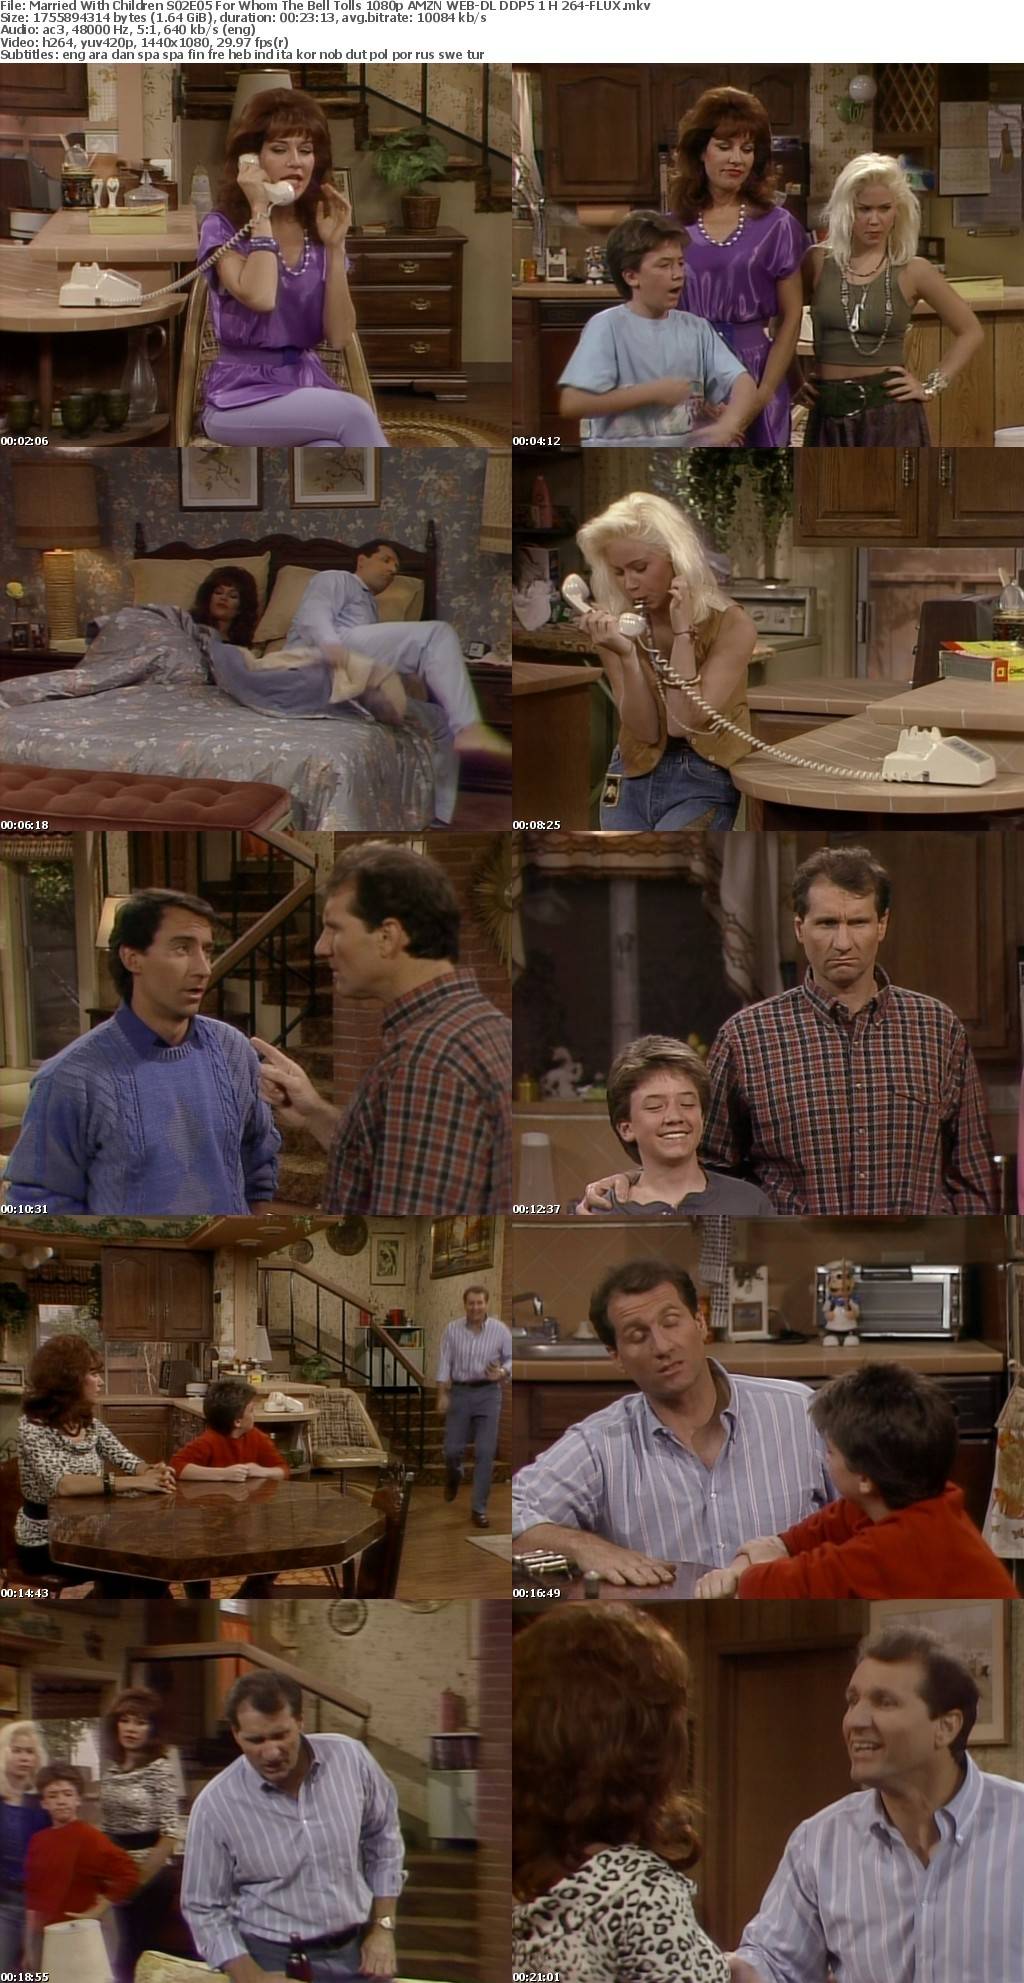 Married With Children S02E05 For Whom The Bell Tolls 1080p AMZN WEB-DL DDP5 1 H 264-FLUX